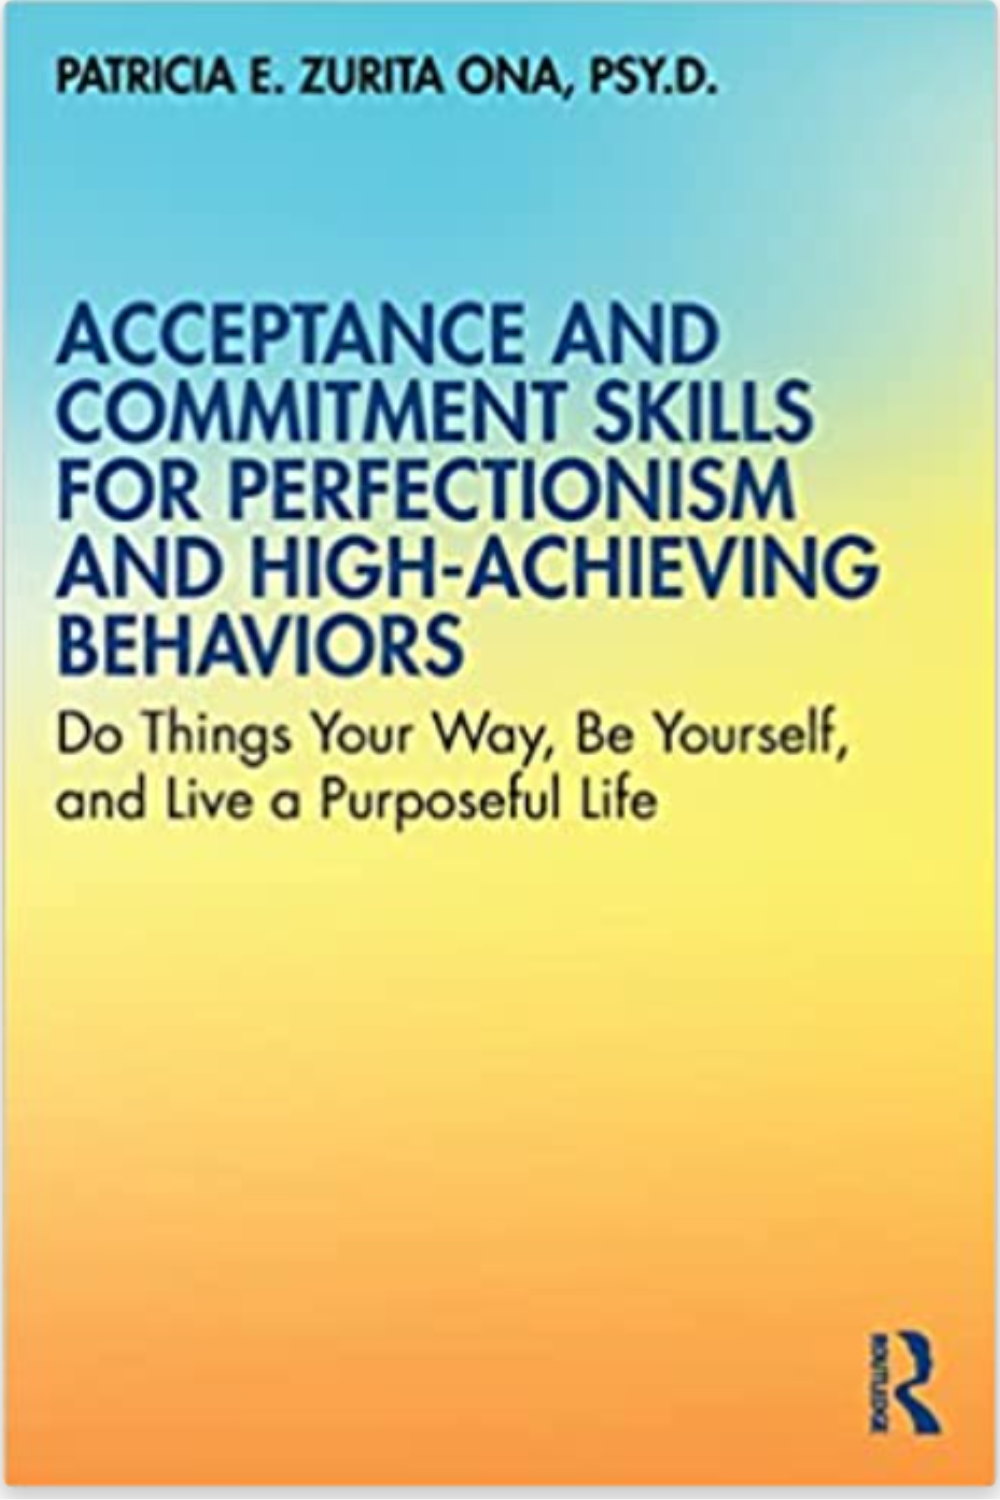 Acceptance & Commitment Therapy Book Applied to Perfectionism